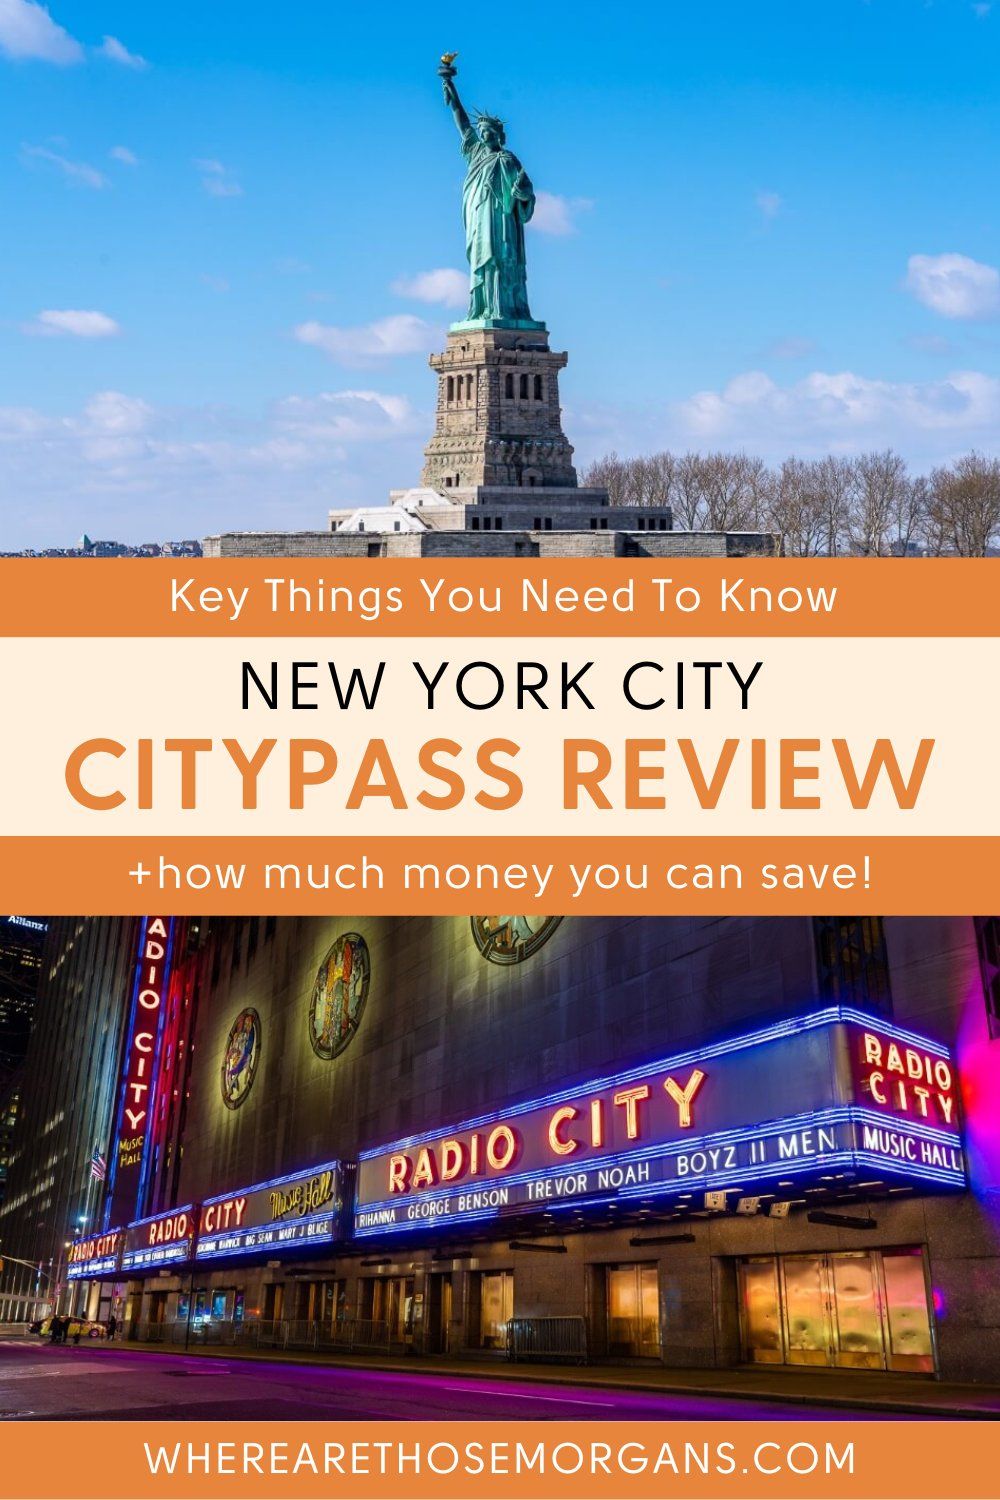 Review of the New York CityPASS